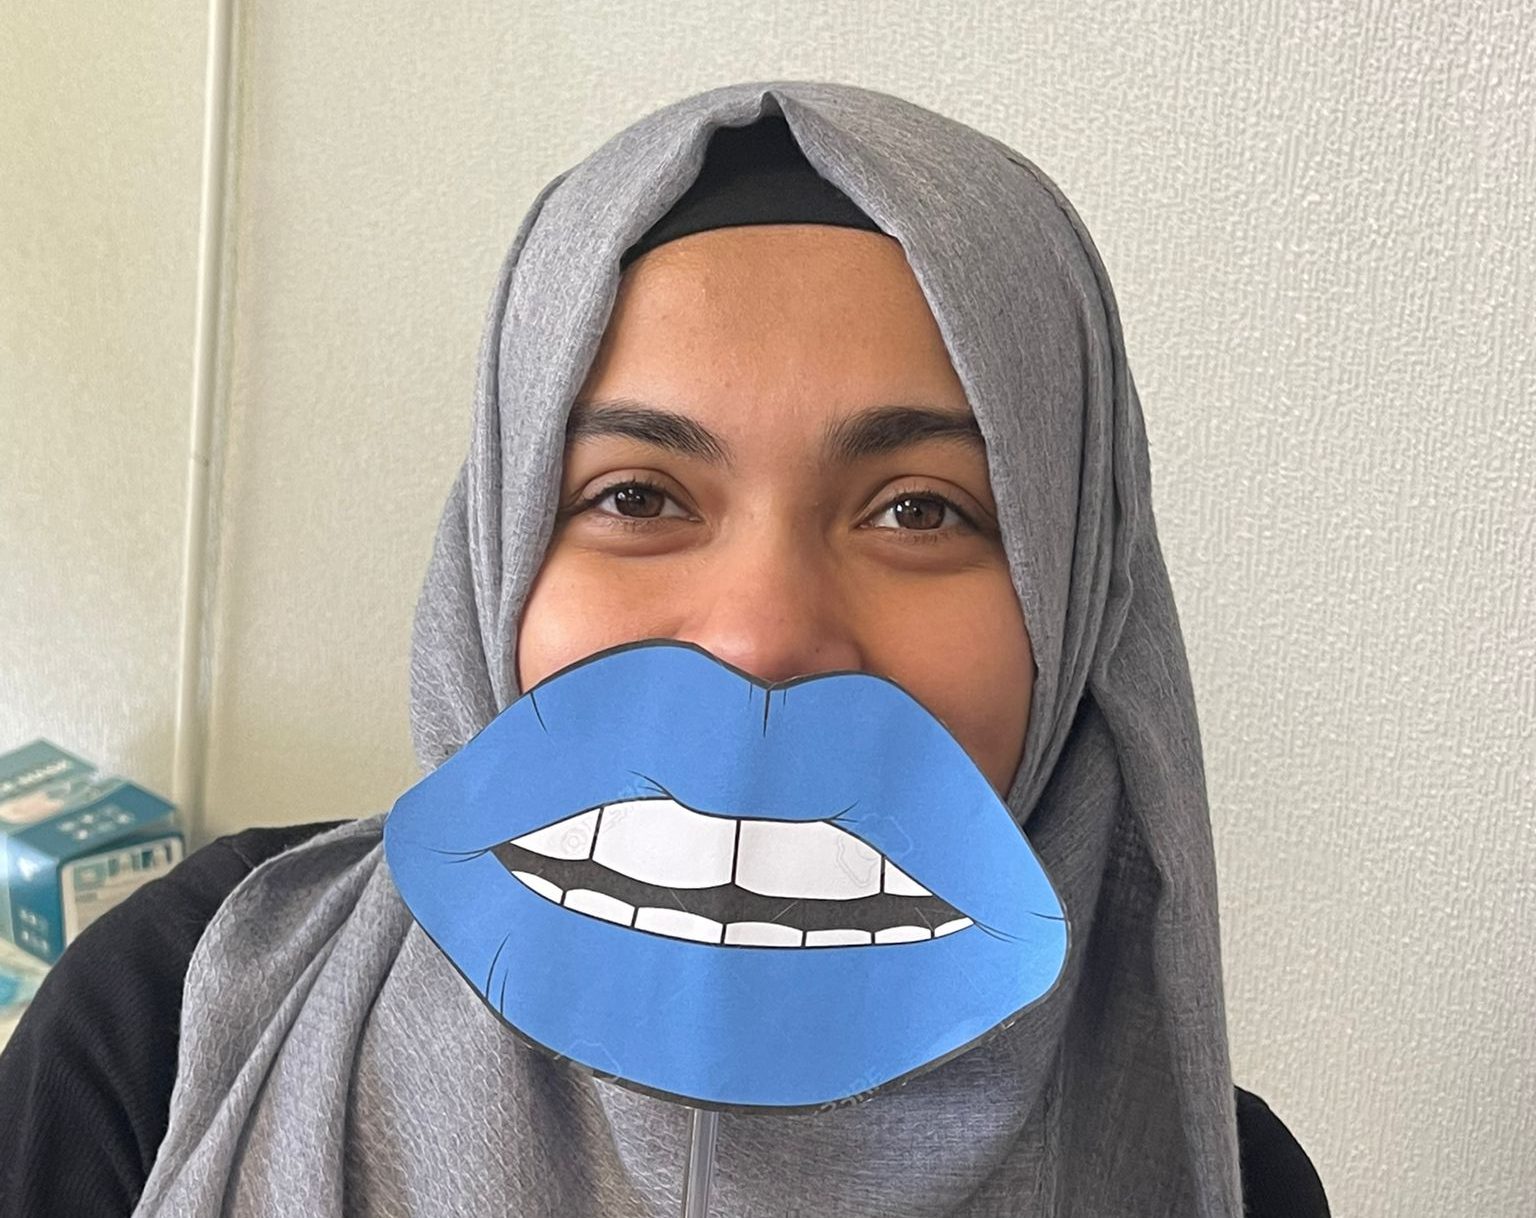 Manal joined The Dental Team Group in March 2022 as a Trainee Nurse to support her UK registration as a Dental Hygienist